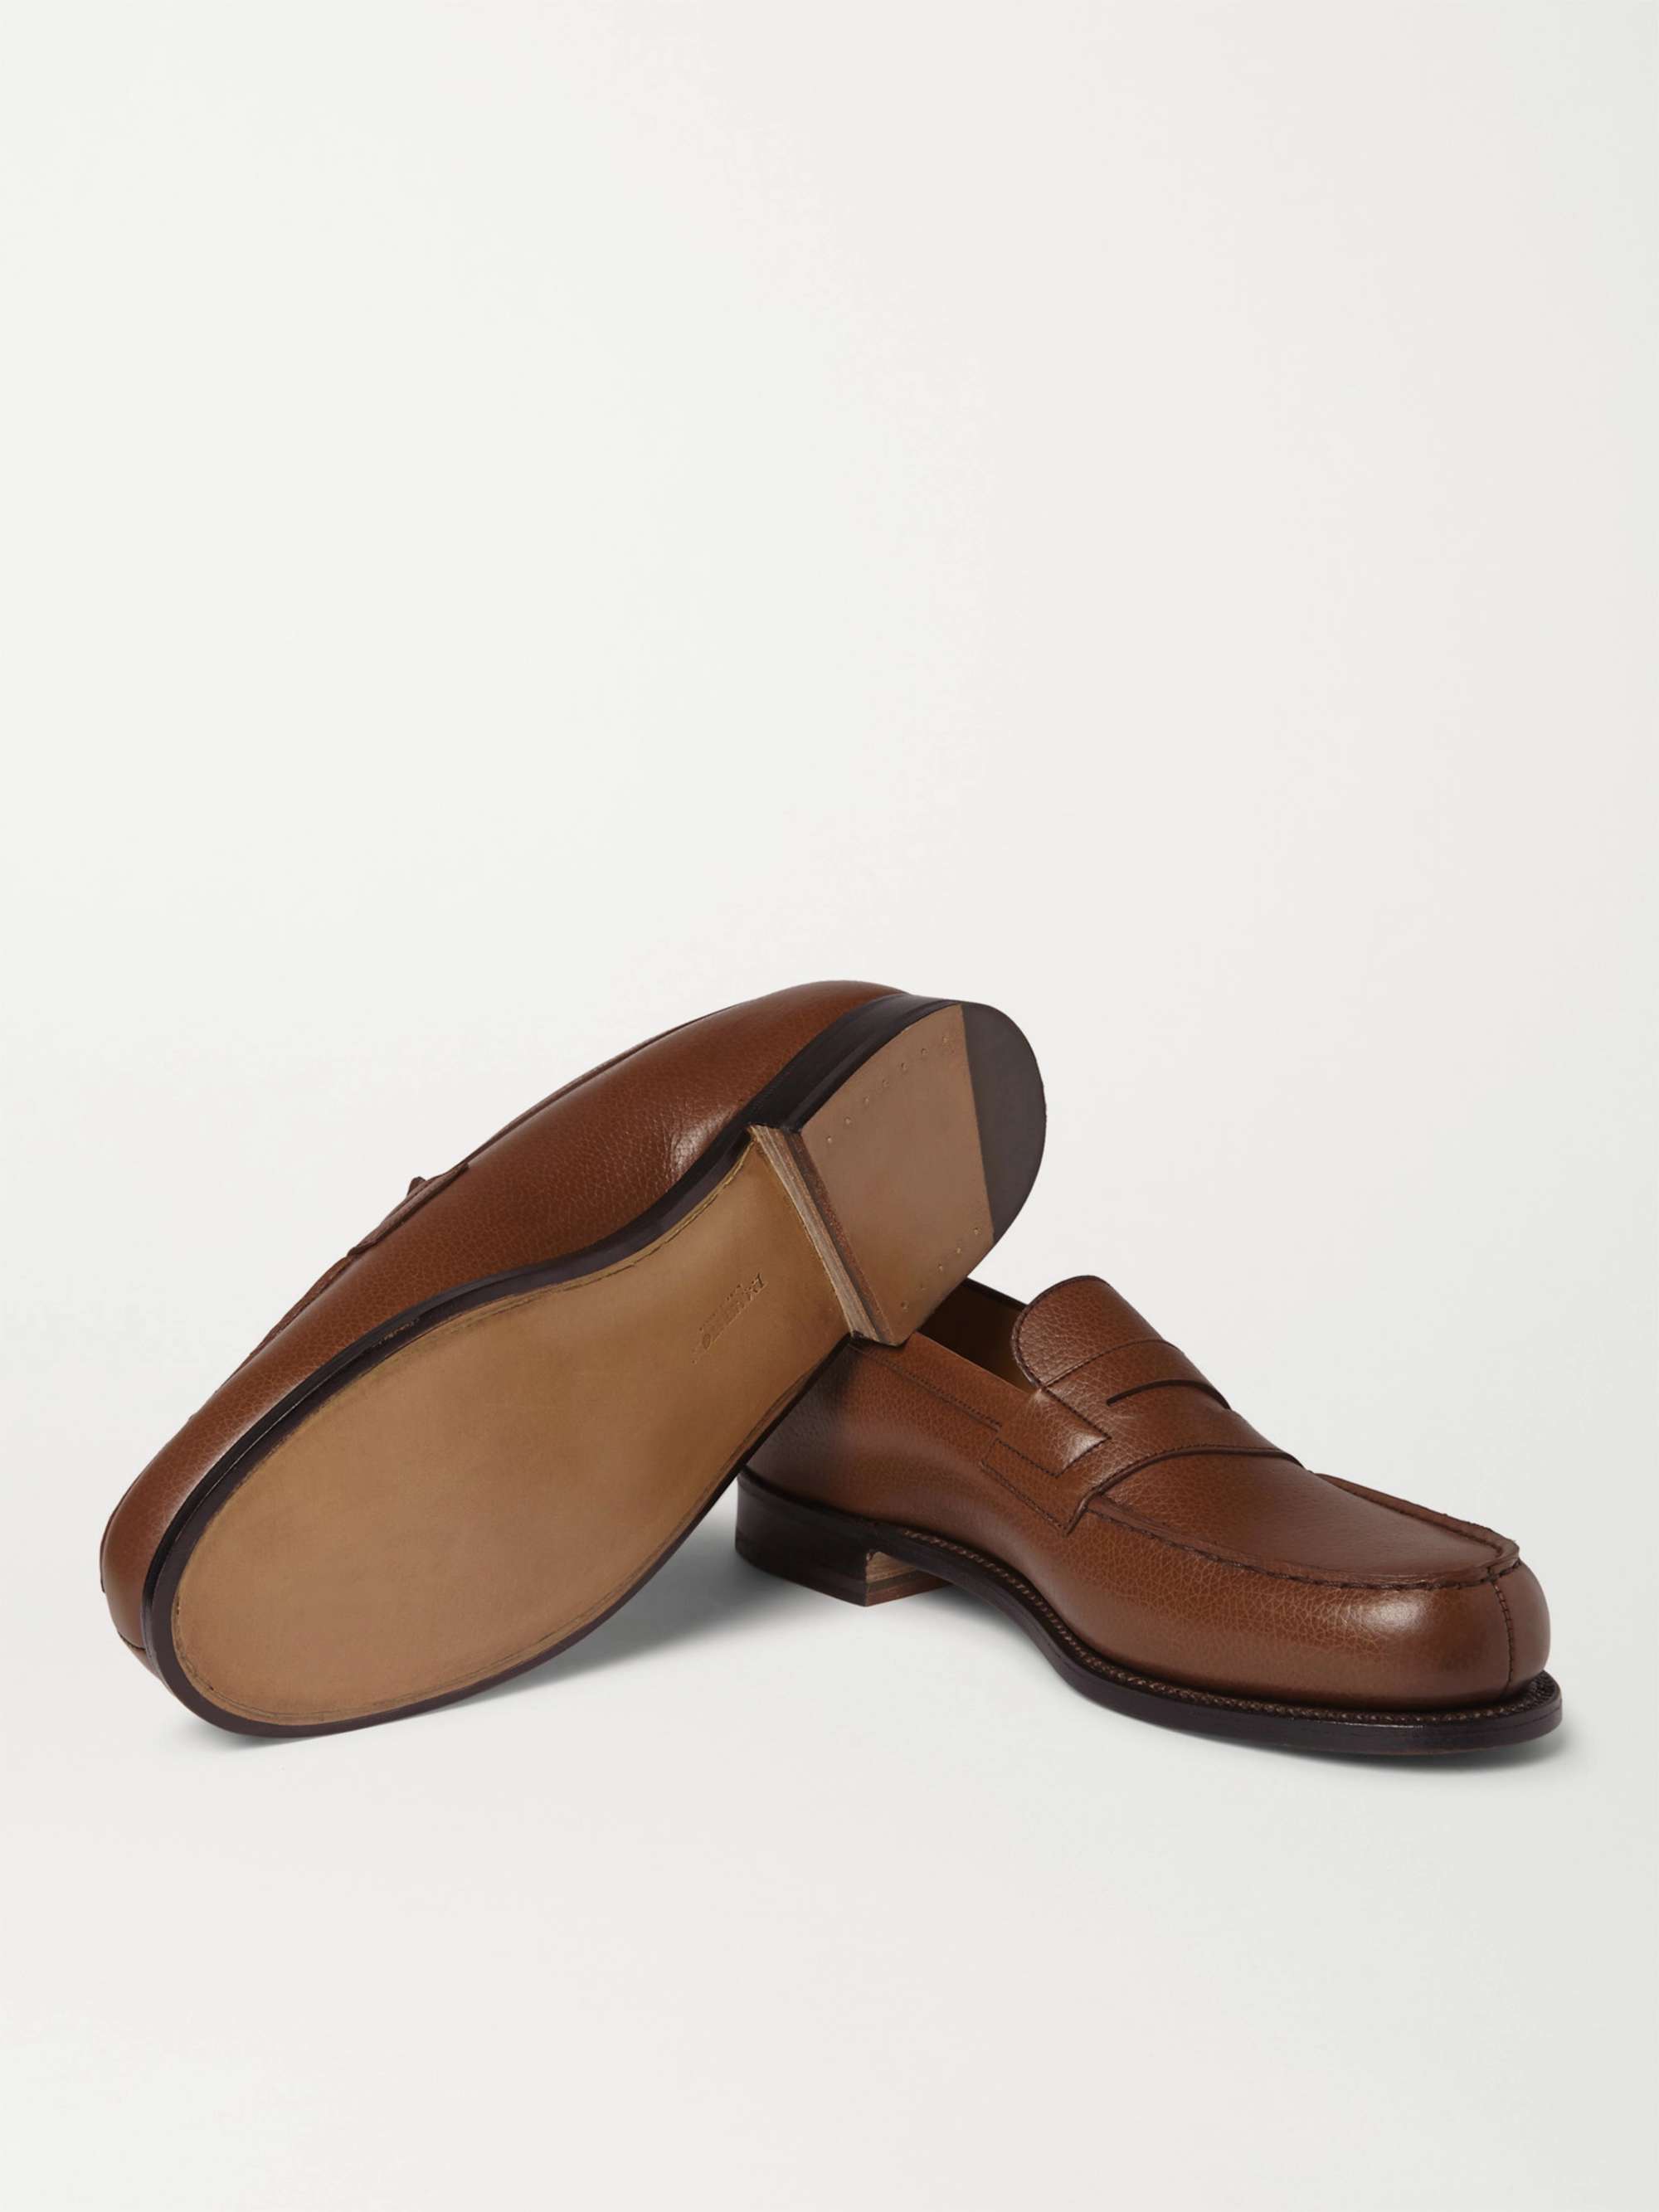 J.M. WESTON 180 Moccasin Grained-Leather Loafers